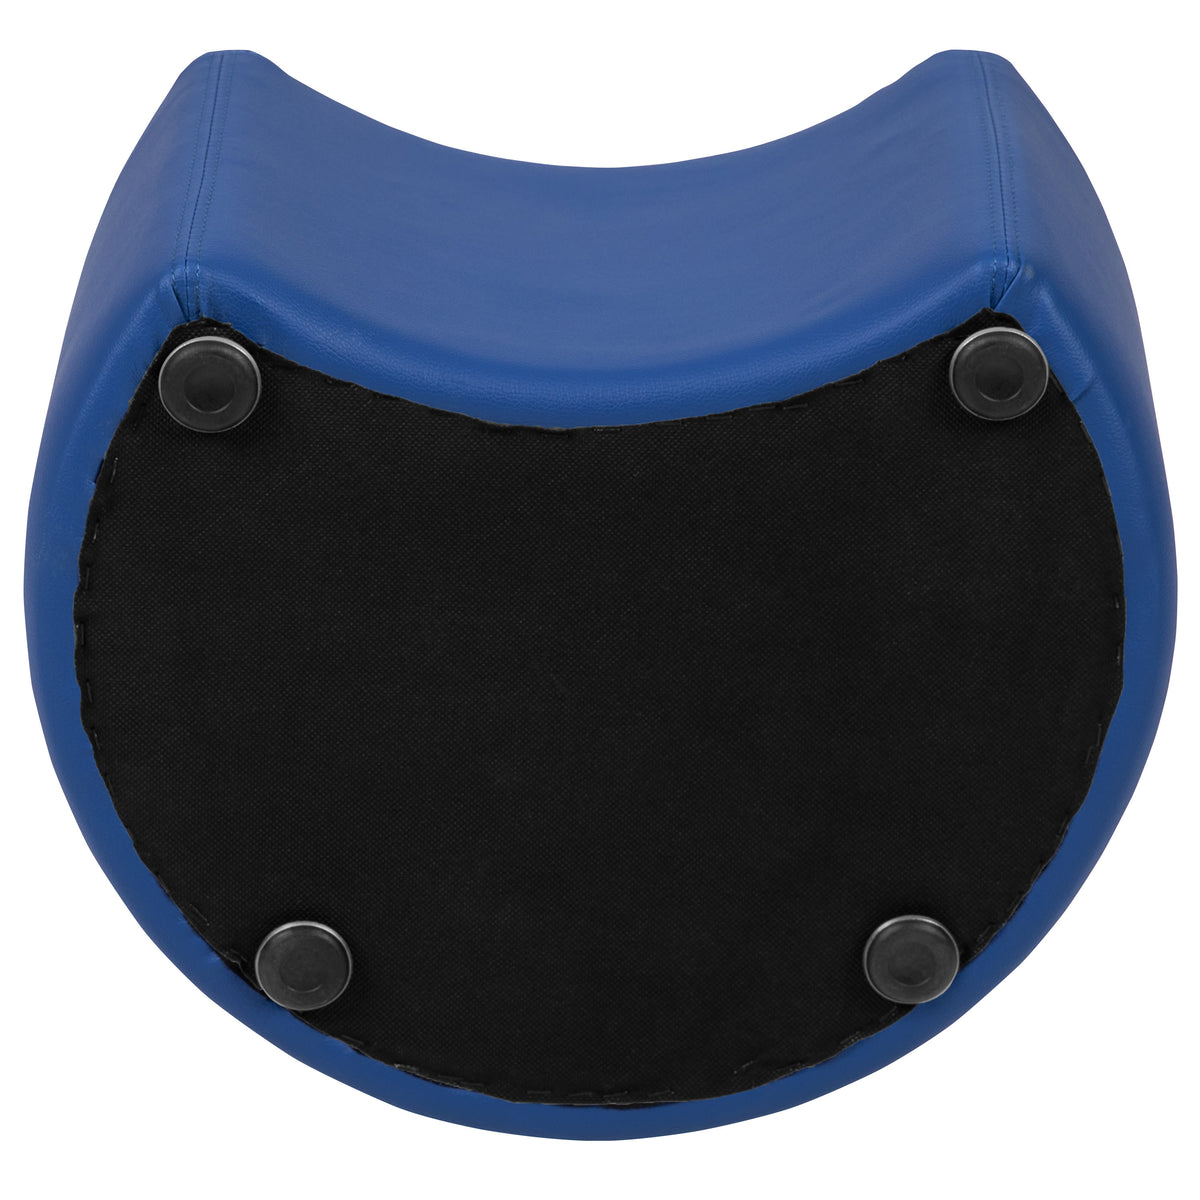 Blue |#| Soft Seating Flexible Moon for Classrooms - 12inch Seat Height (Blue)